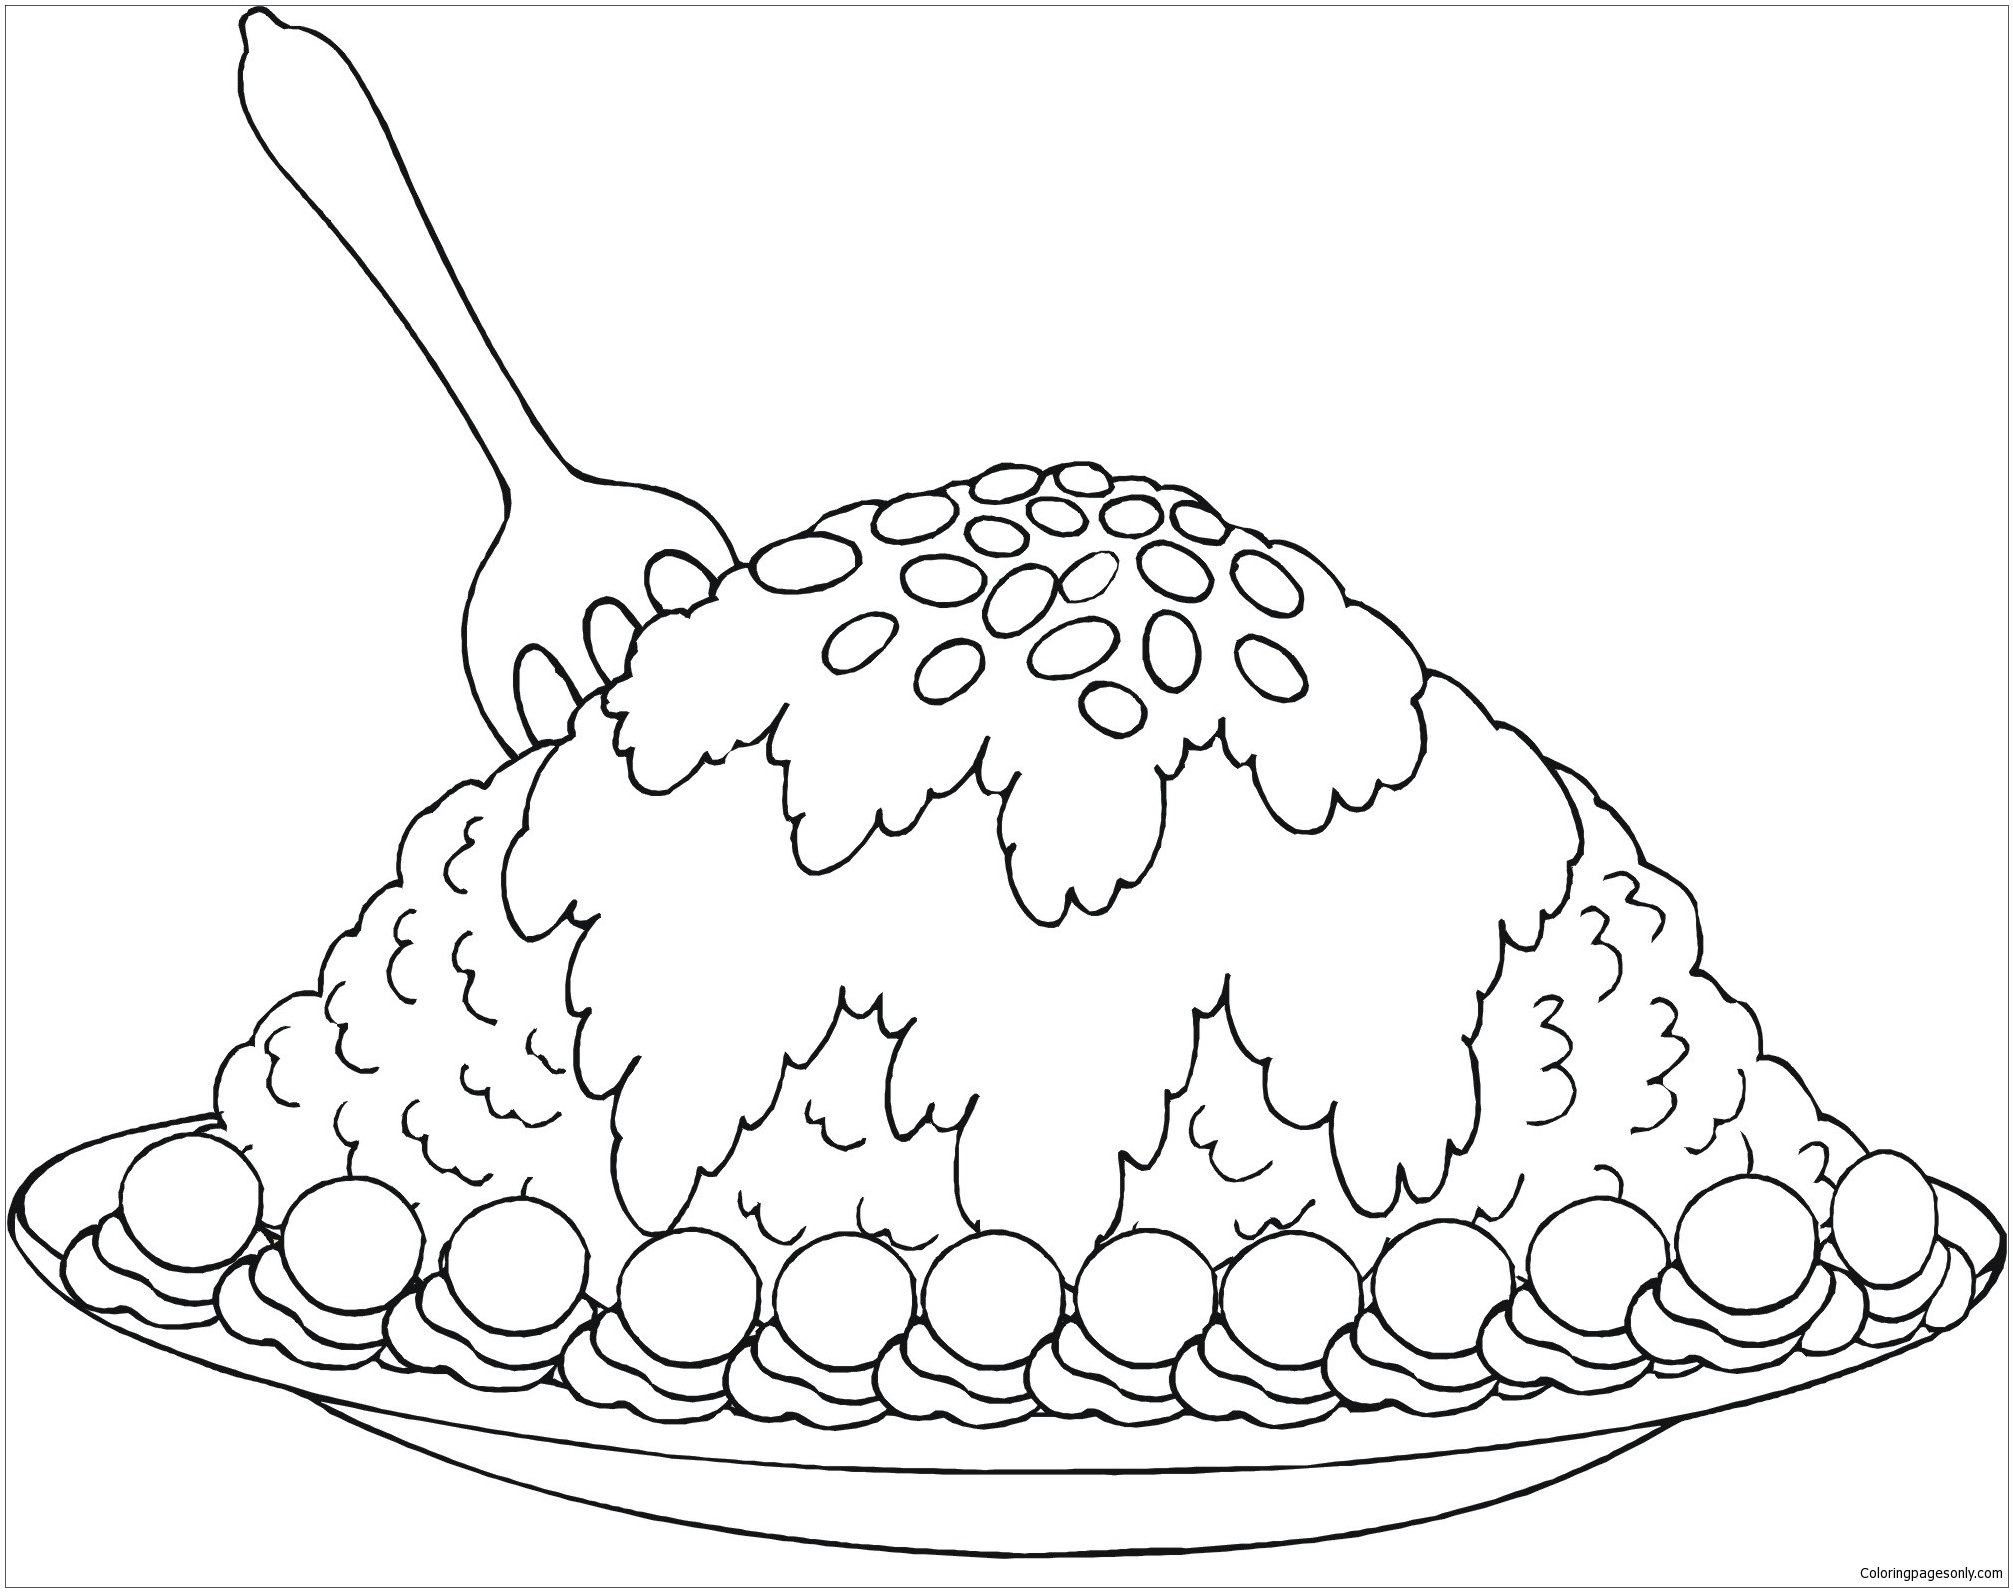 464 Cute Free Dessert Coloring Pages with Animal character